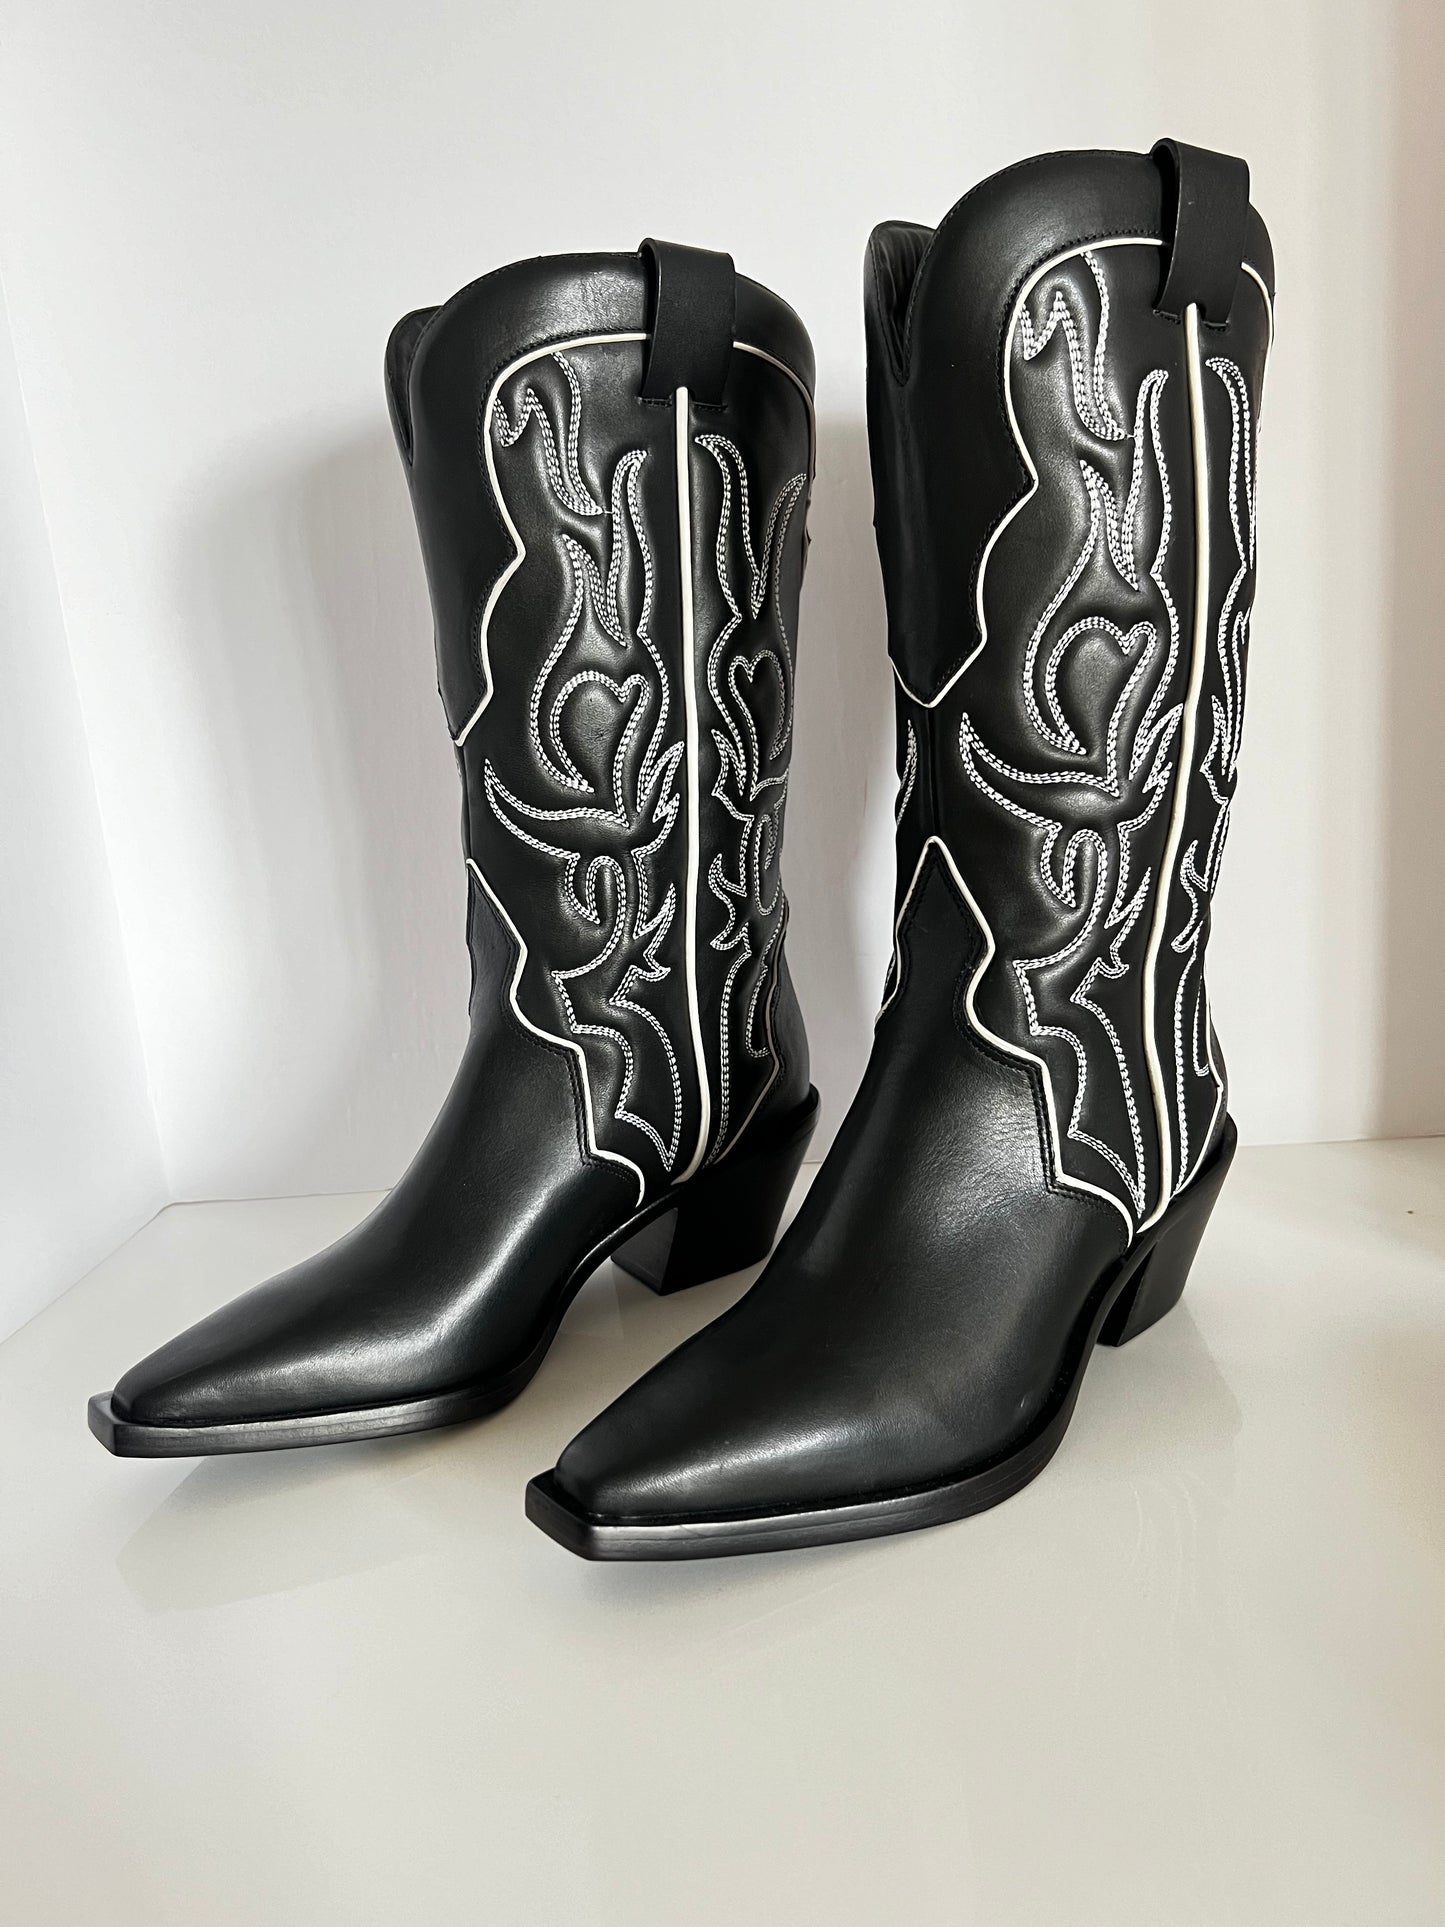 Brand New Reformation Olive Black Mid Calf Leather Cowboy Boots Size 8.5